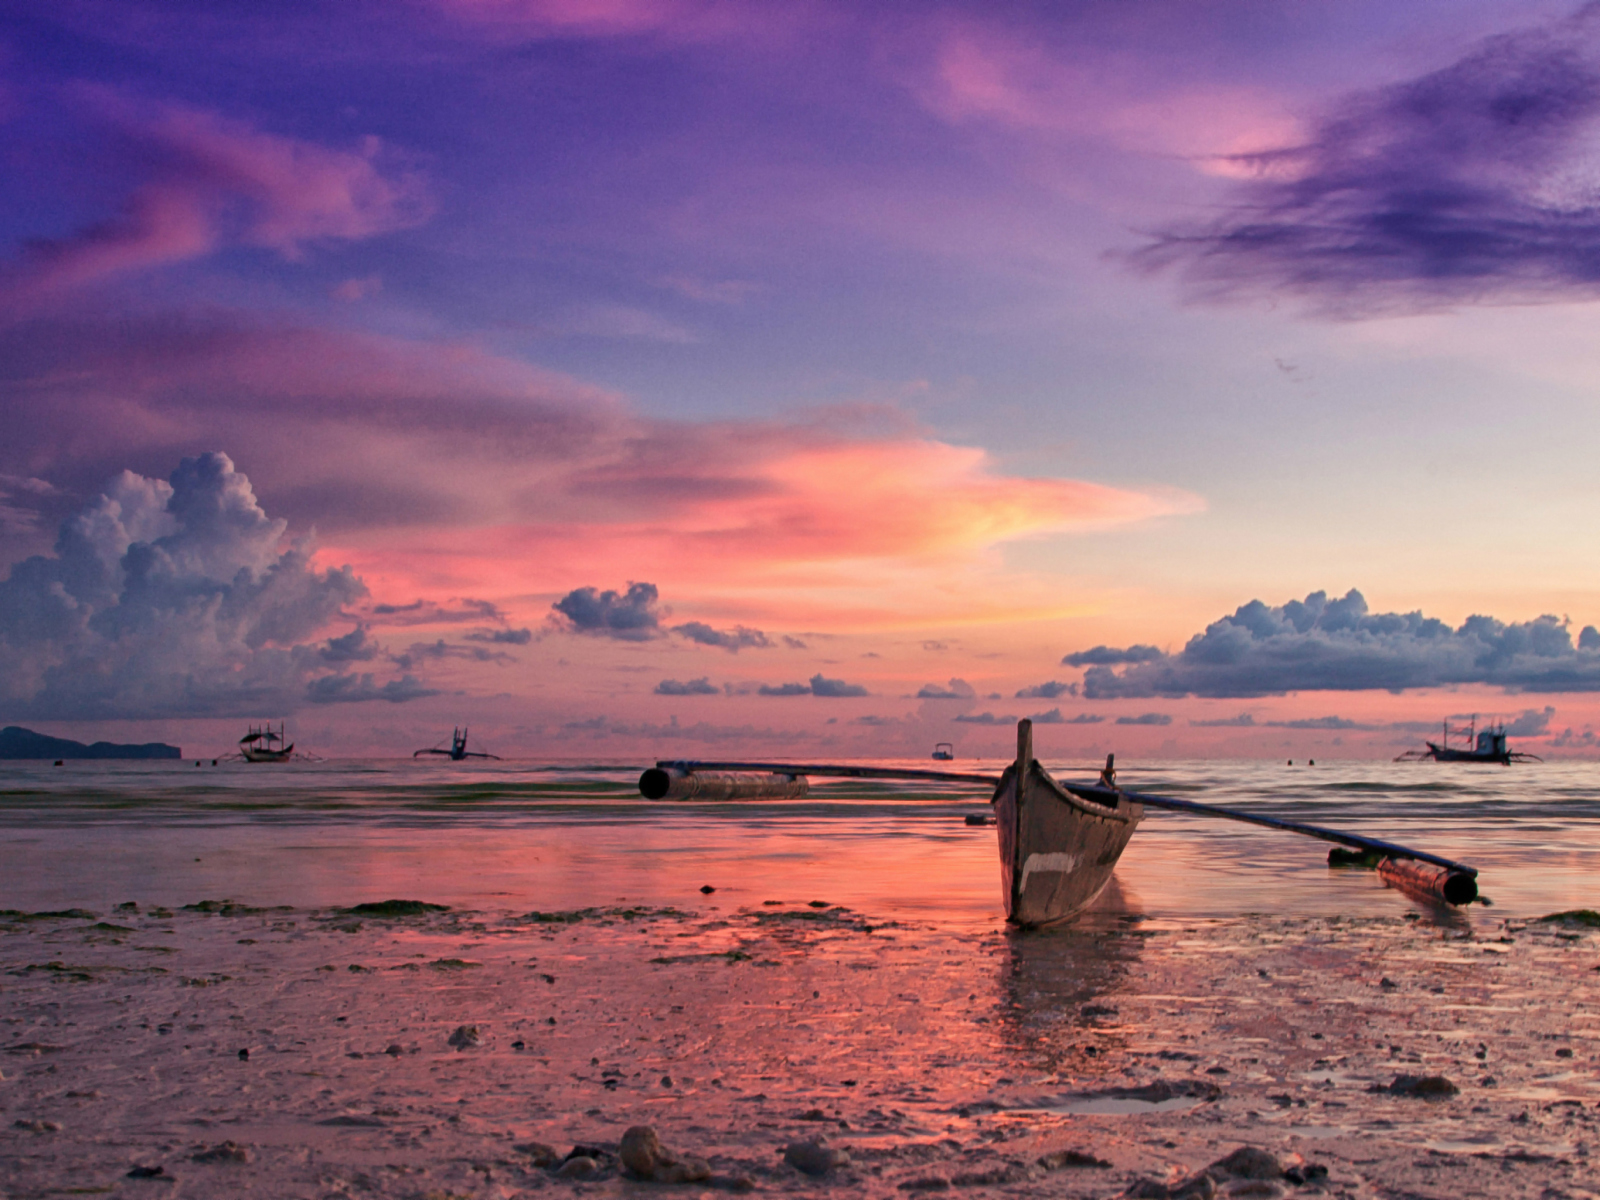 Sfondi Pink Sunset And Boat At Beach In Philippines 1600x1200